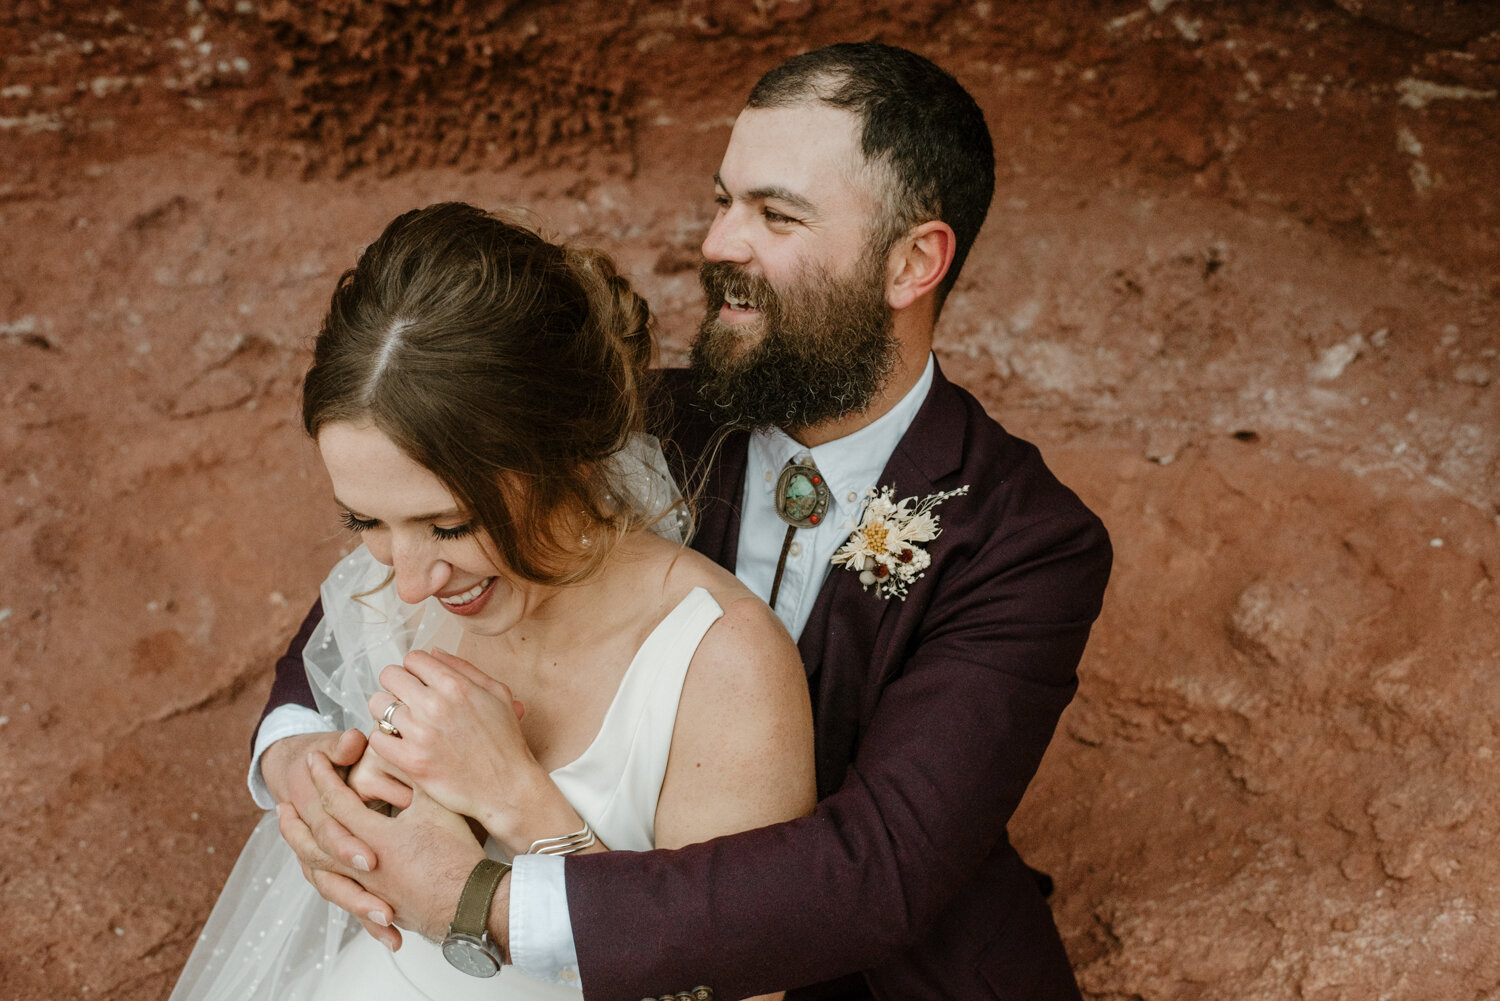 Fisher Towers in Moab, UT Elopement Wedding Photos